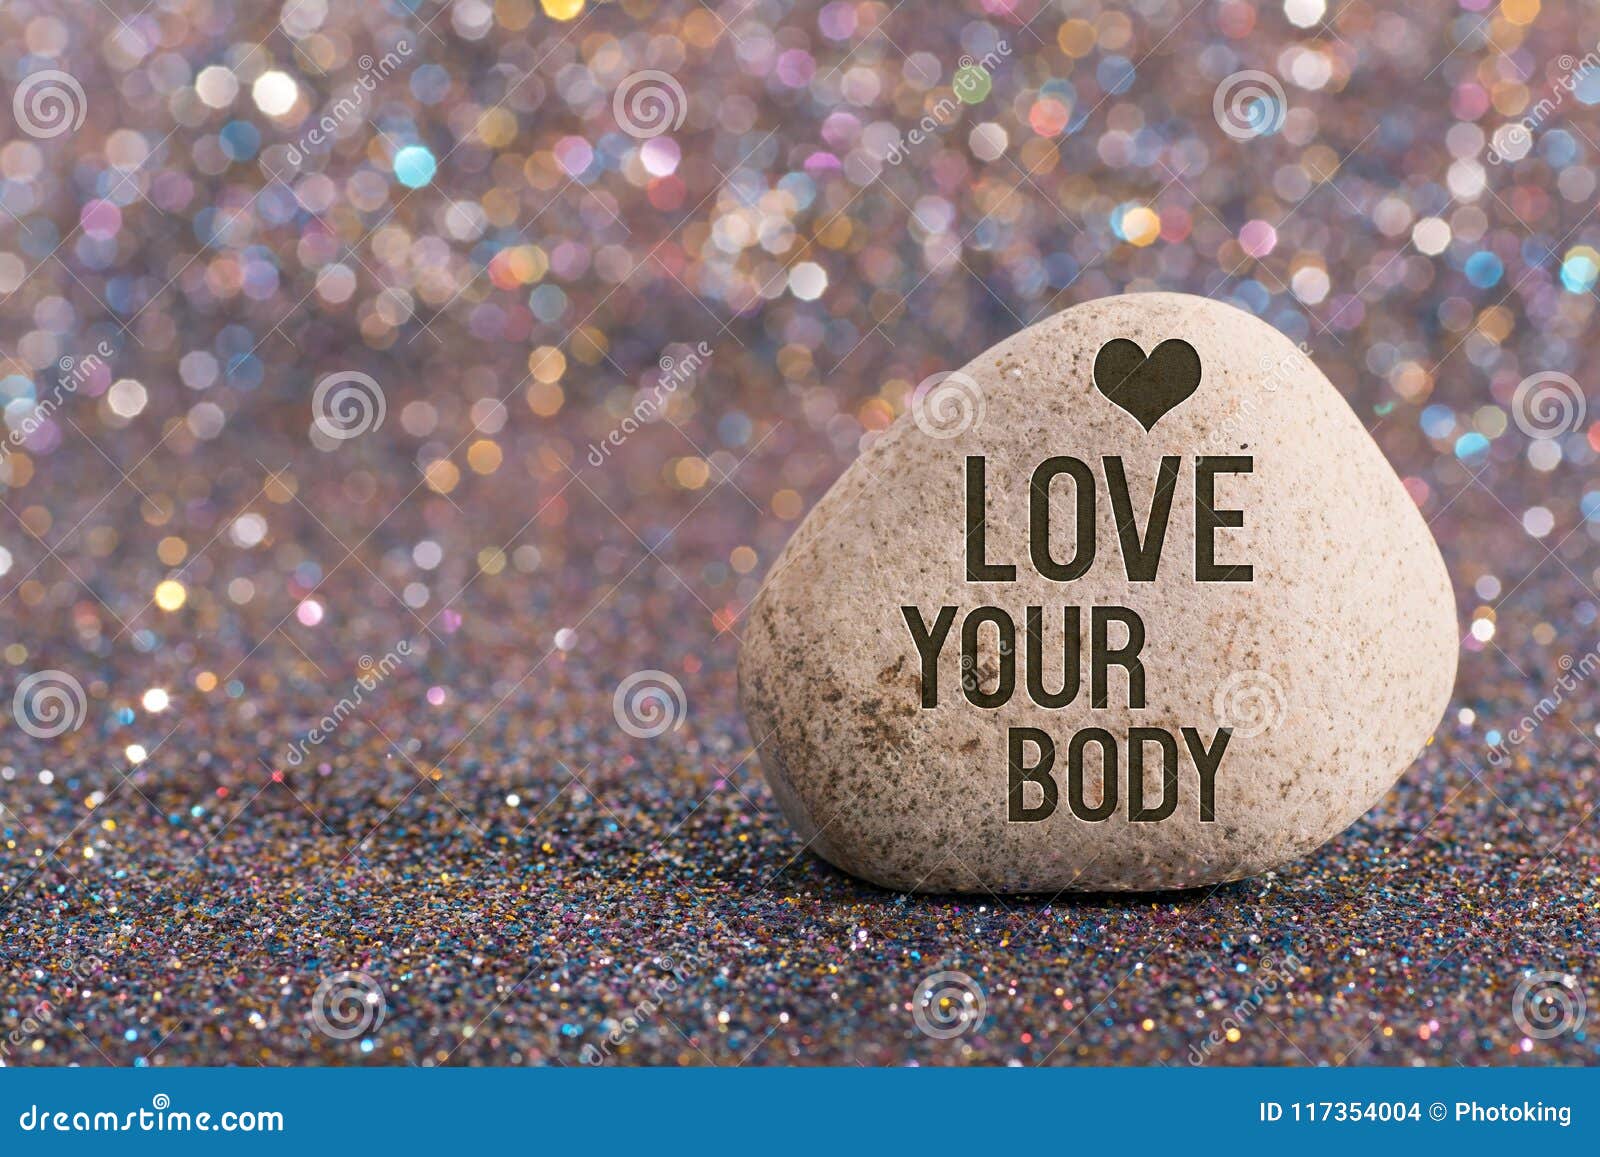 love your body on stone